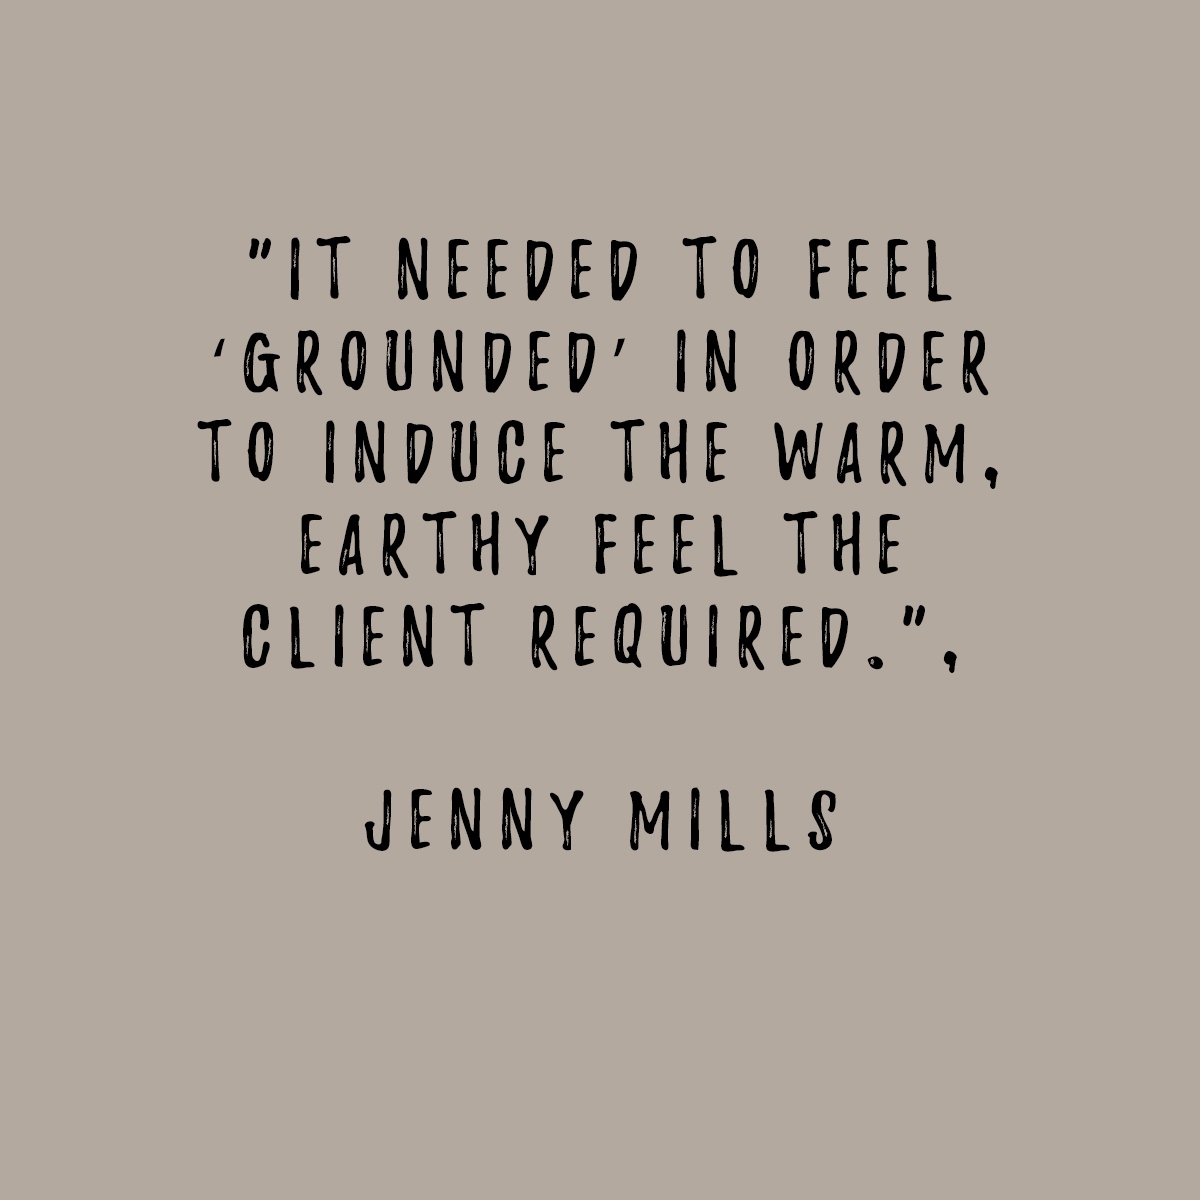 QUOTES BY JENNY MILLS

